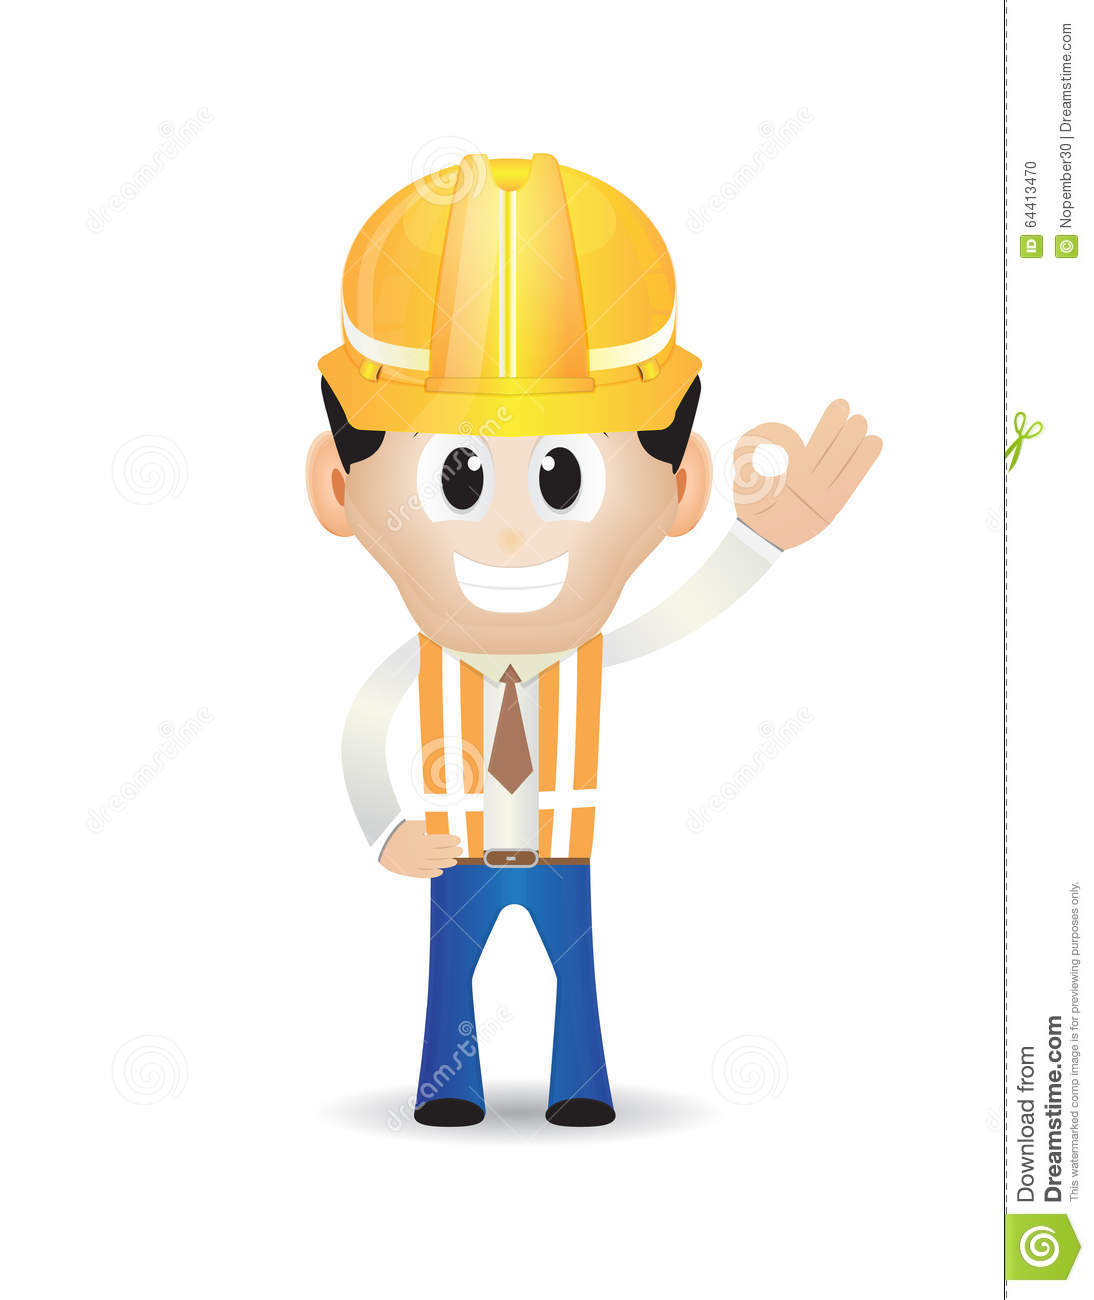 Construction Worker Cartoon Picture of Man